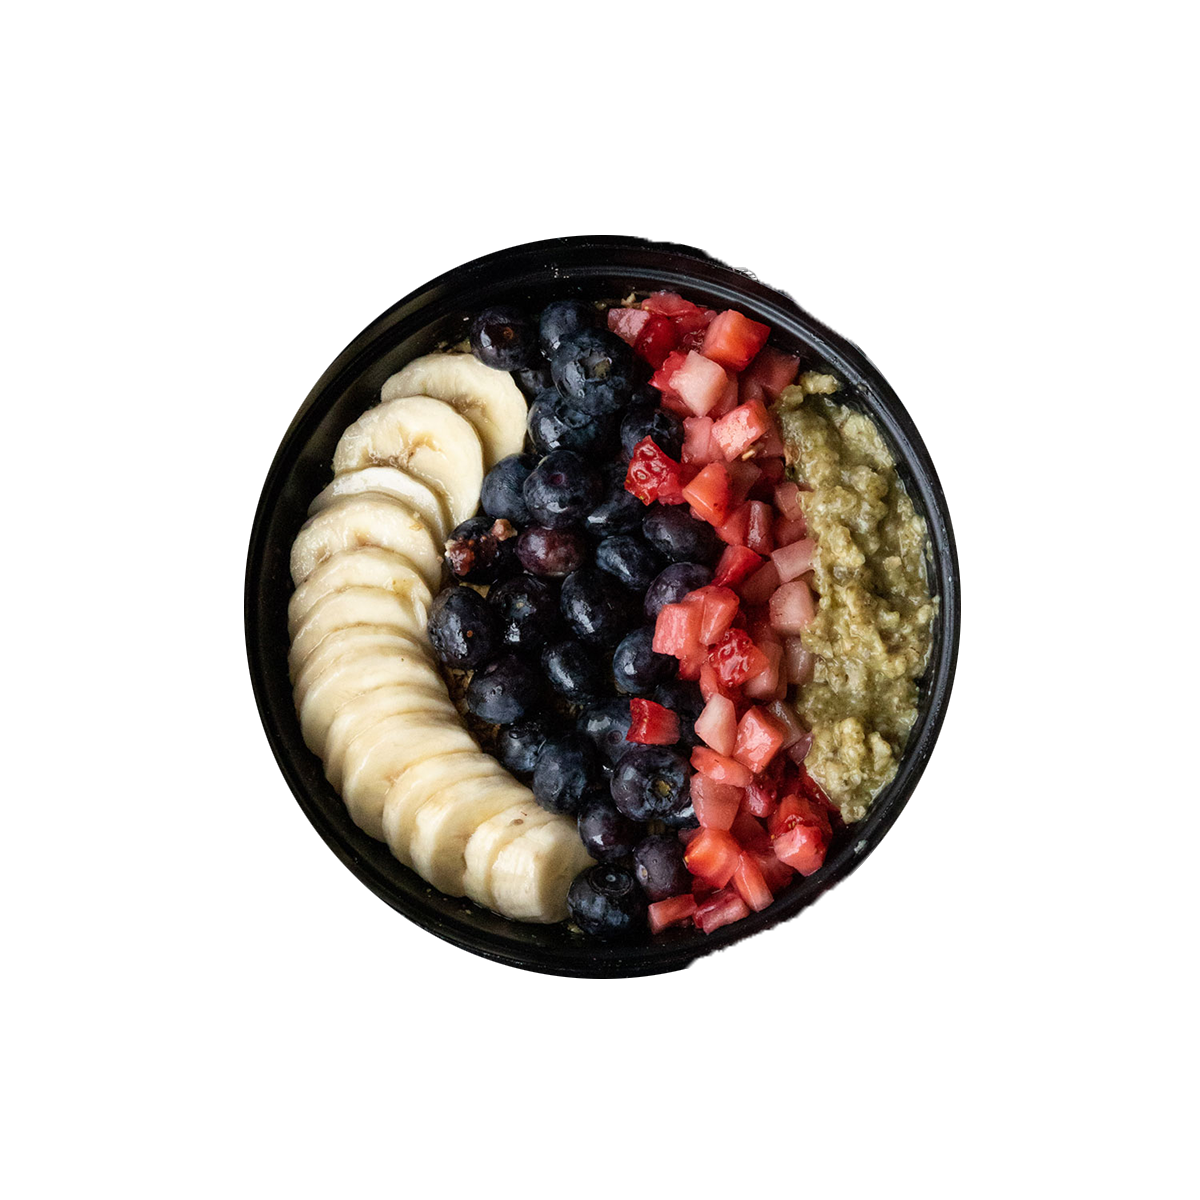 Matcha Morning Wild Berry Fruit Oatmeal Bowl Williamsburg Norfolk Virginia Beach Town Center Cold Pressed